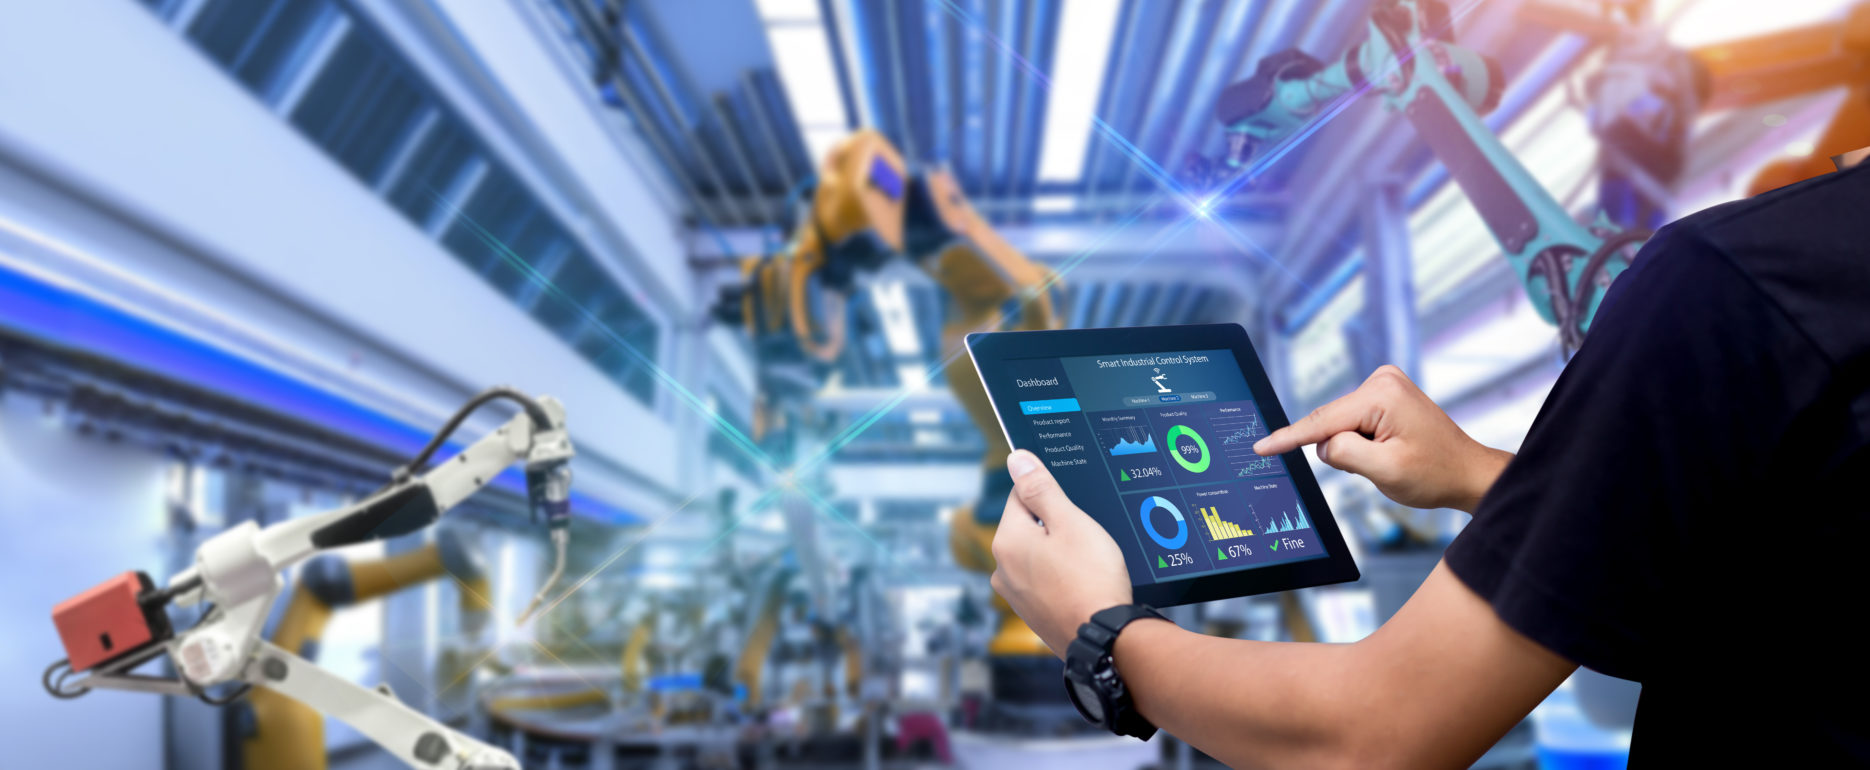 Smart industry control concept.Engineer Hands holding tablet on blurred robot arm automation machine as background